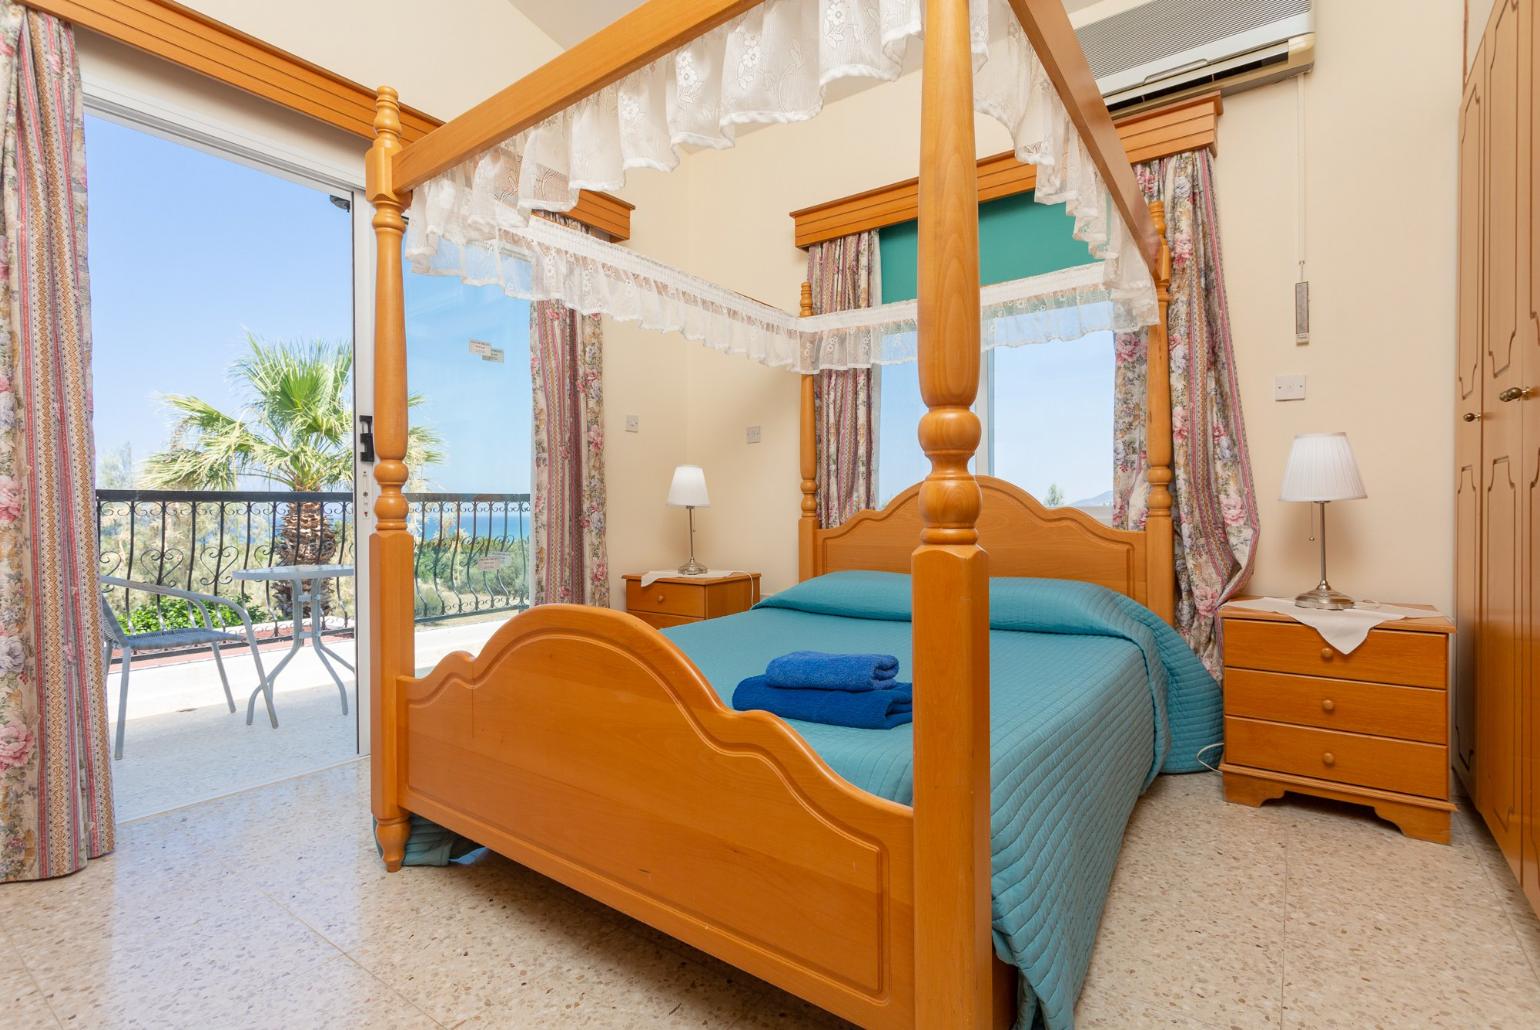 Double bedroom with A/C, en suite bathroom, and balcony access with sea views